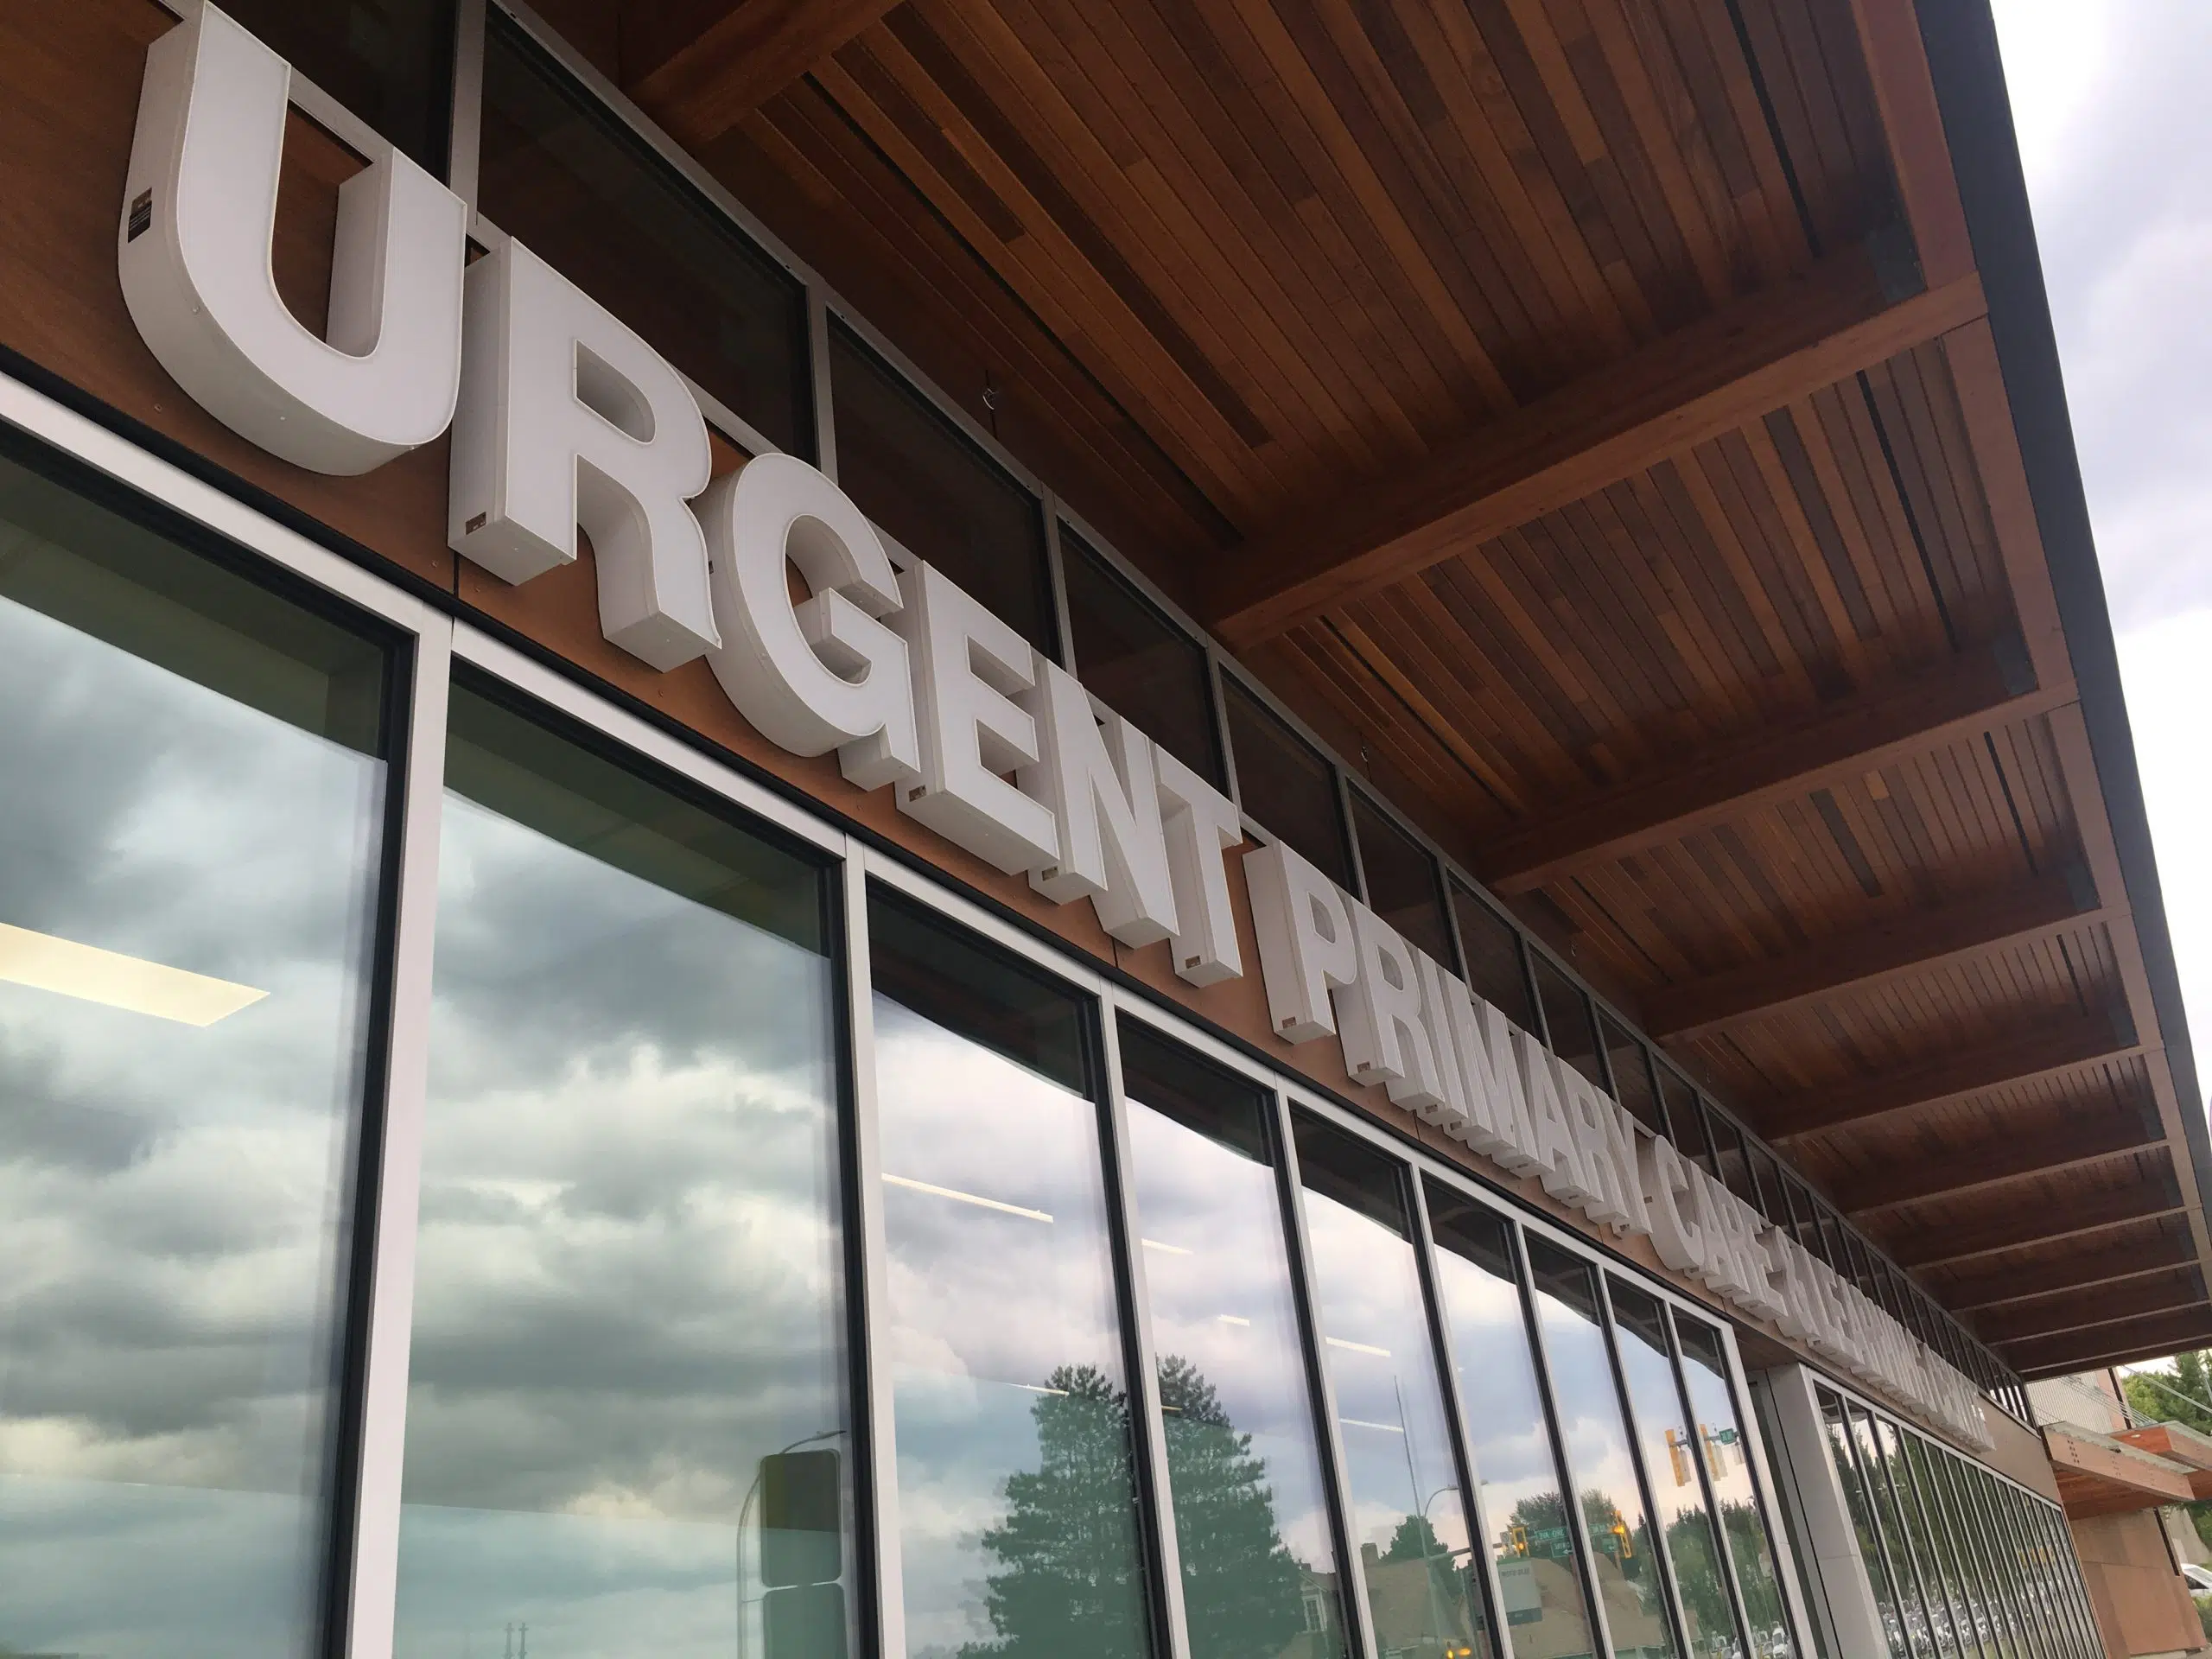 Kamloops residents have started to come through the doors of the Urgent Primary Care and Learning Centre